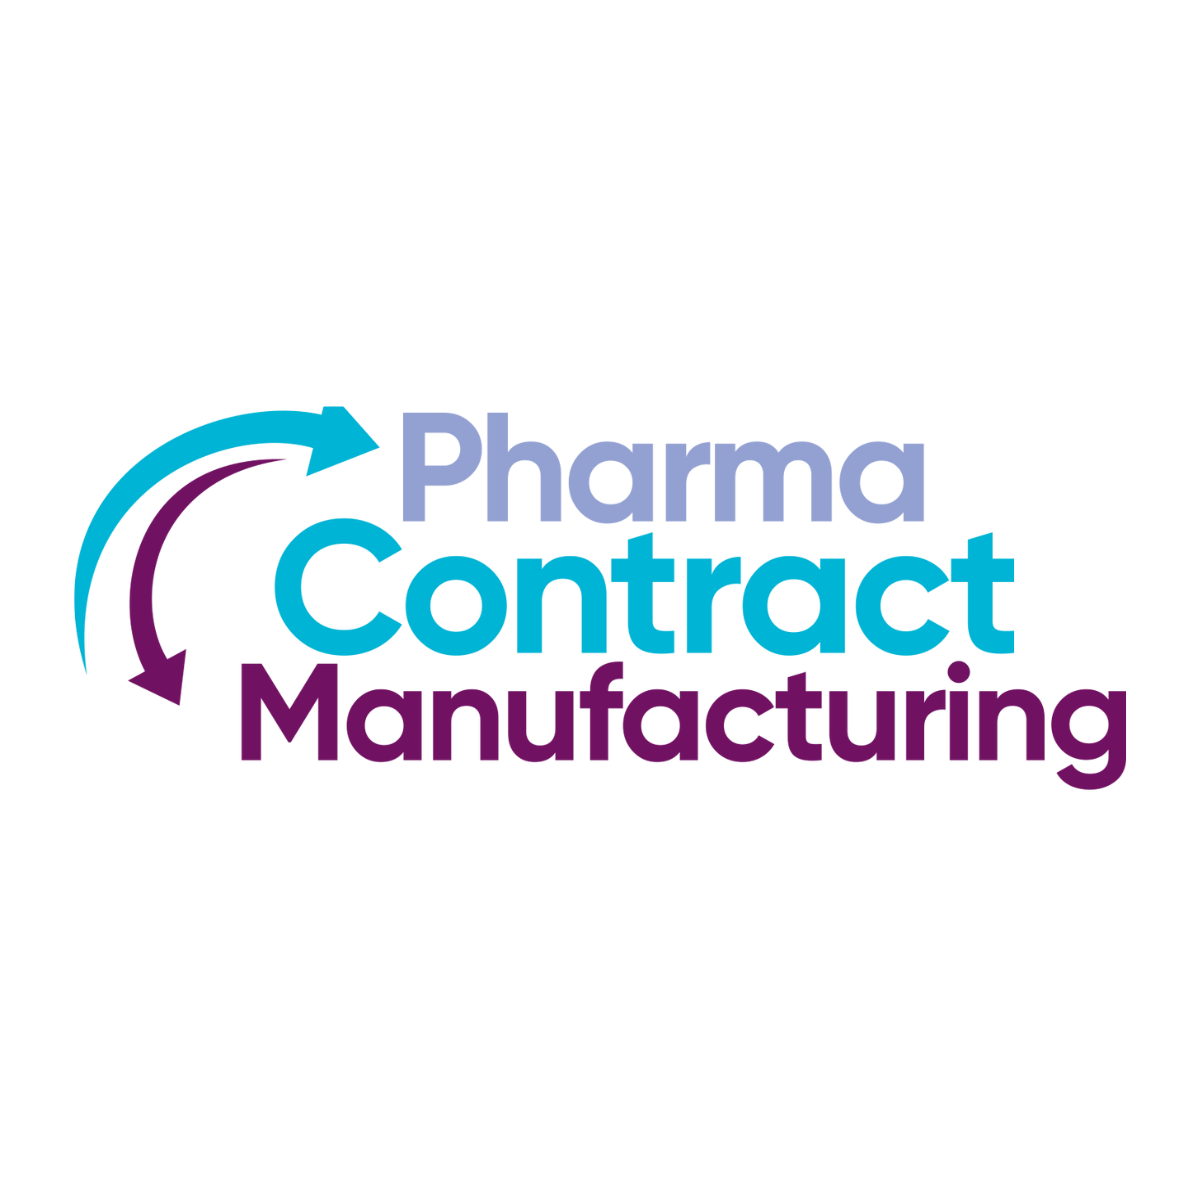 Pharma Contract Manufacturing, Berlin, Germany